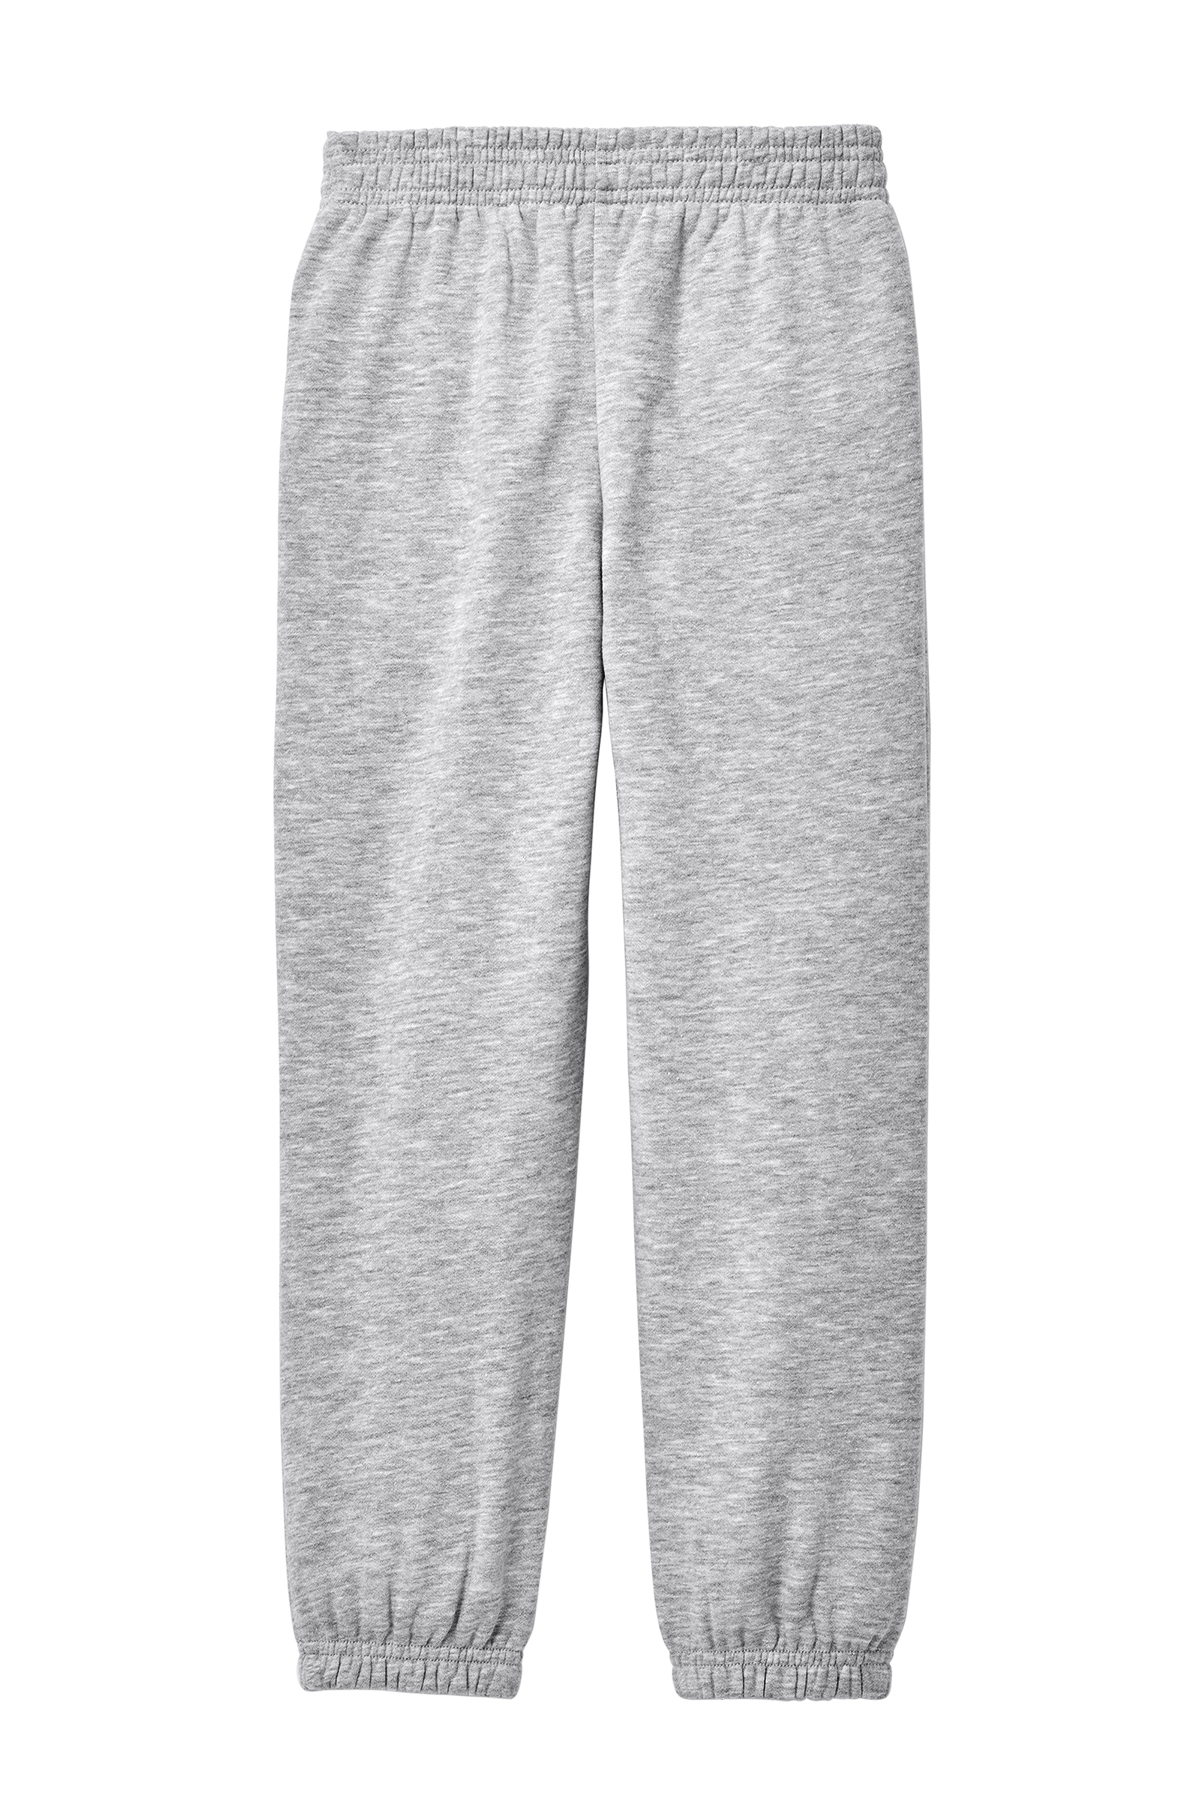 District Youth V.I.T. Fleece Sweatpant | Product | SanMar